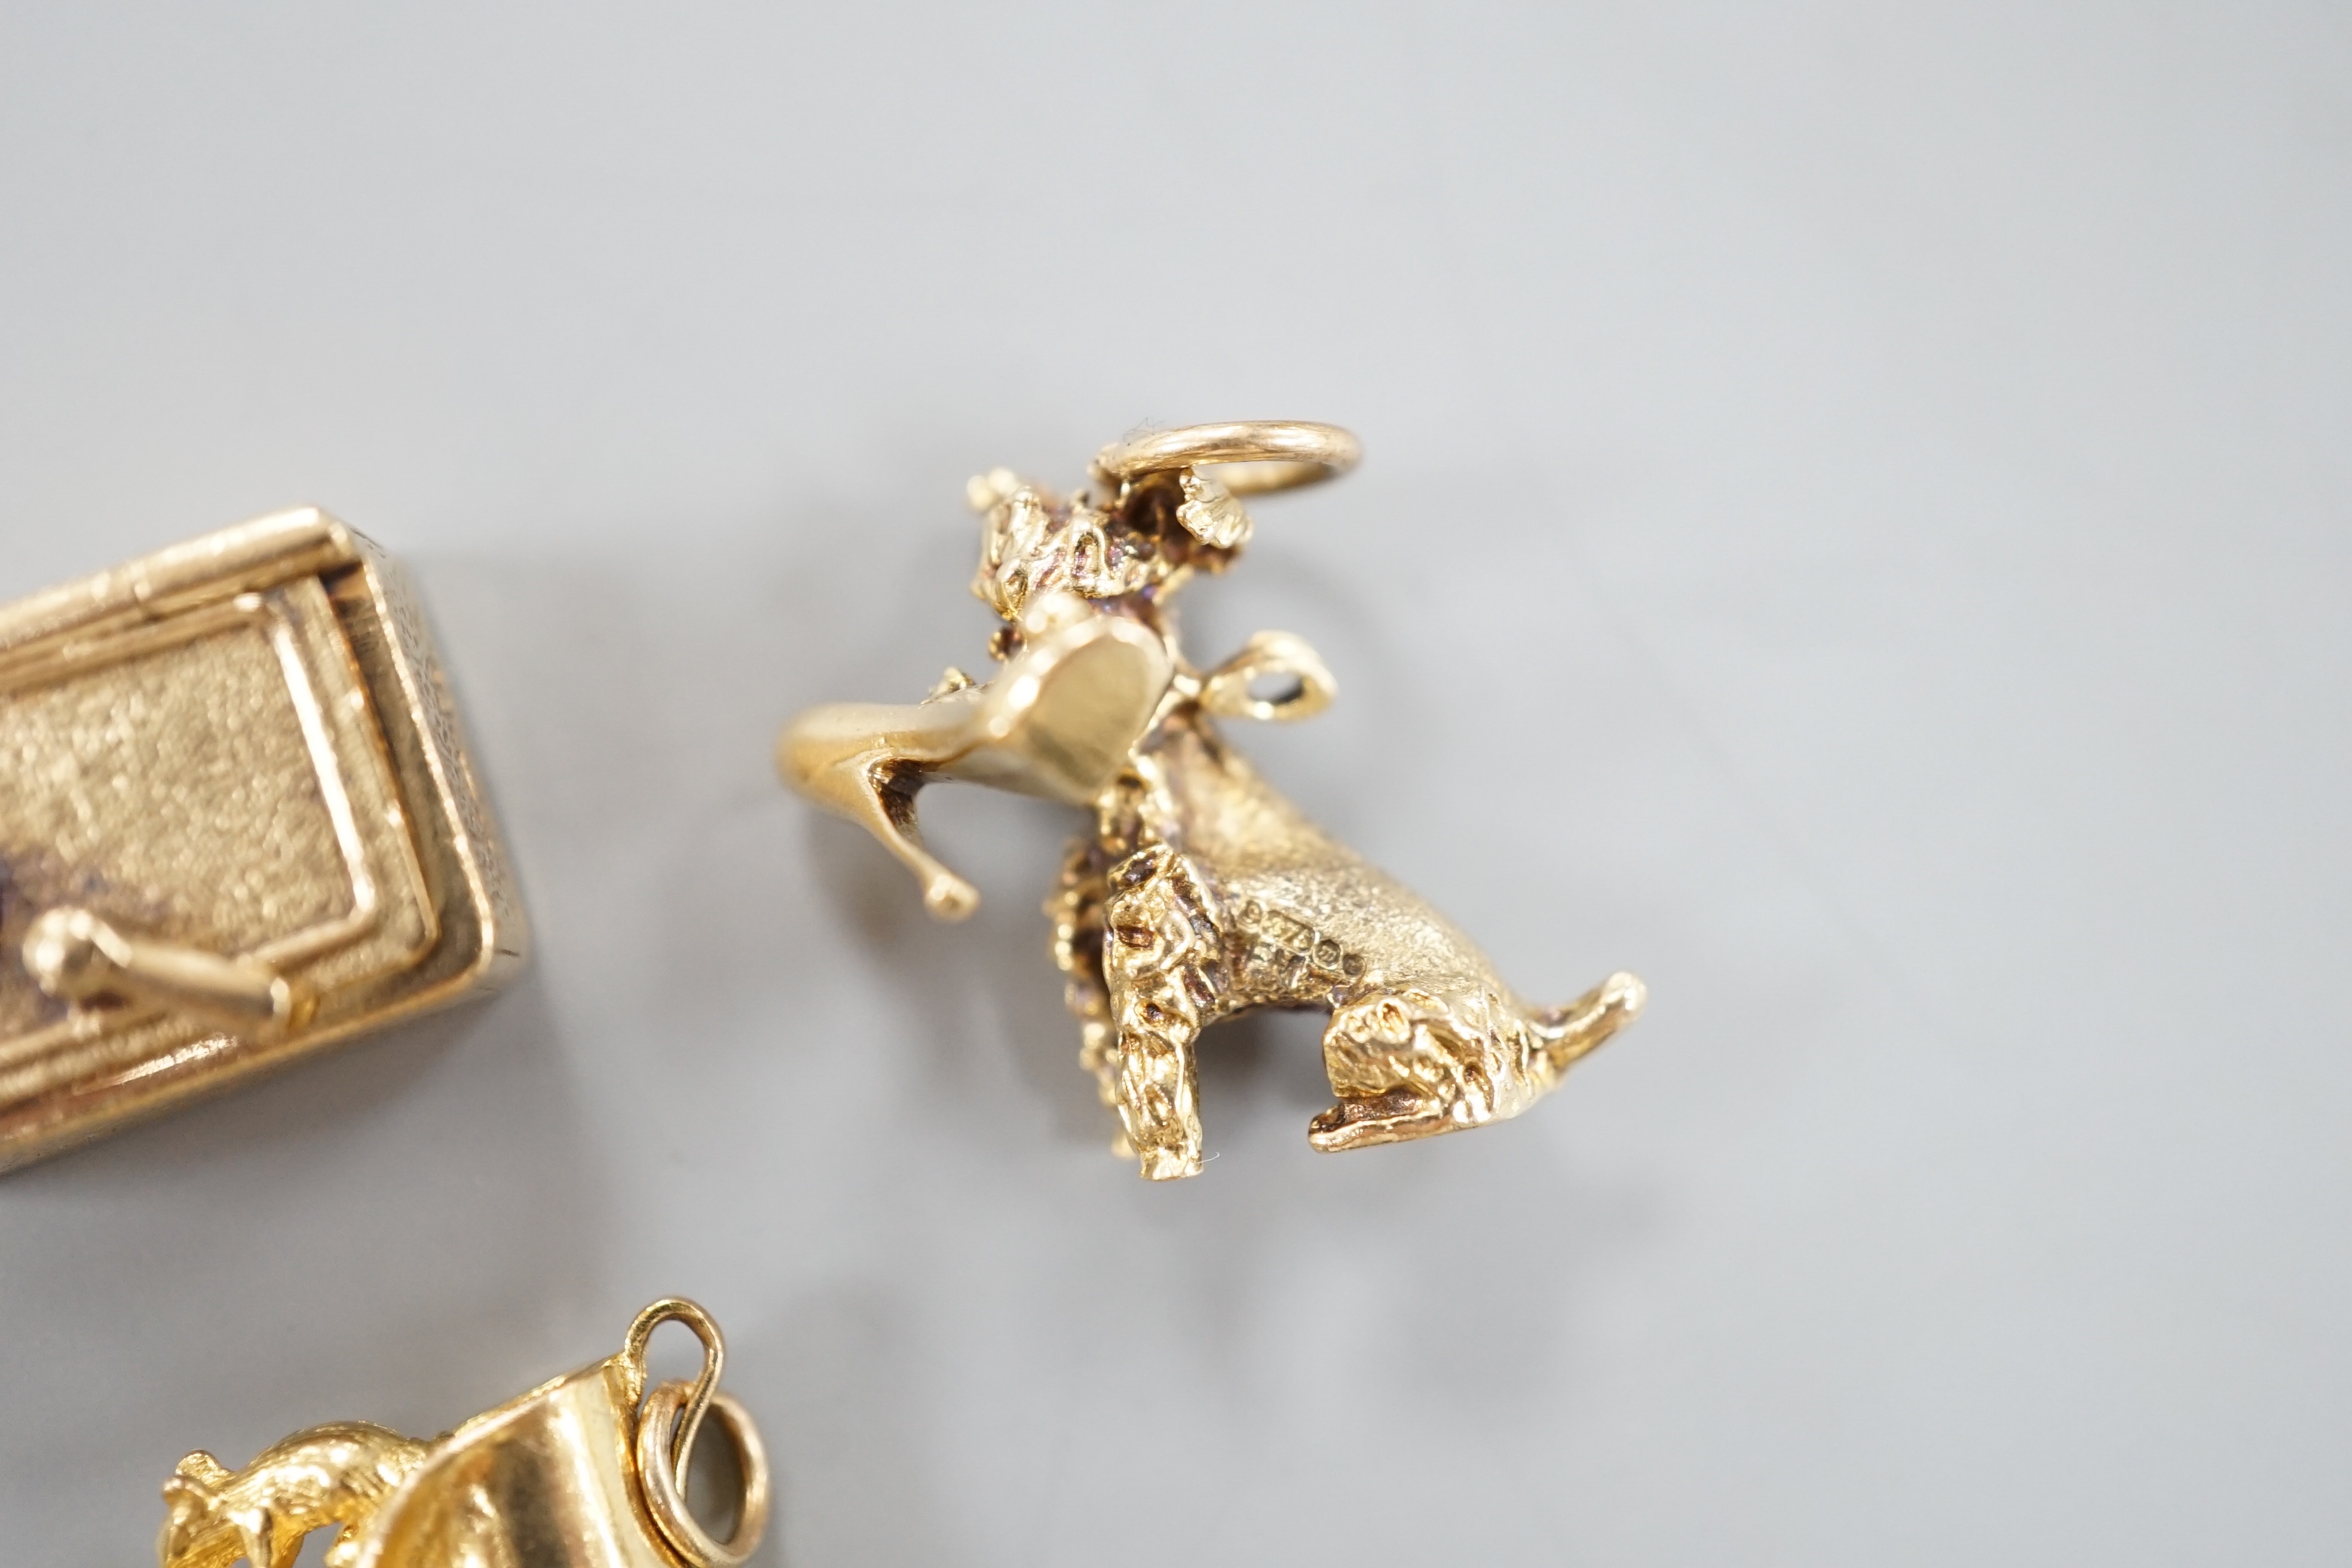 Five assorted modern 9ct gold charms, including a well, safe and boot with mice, 21.4 grams.